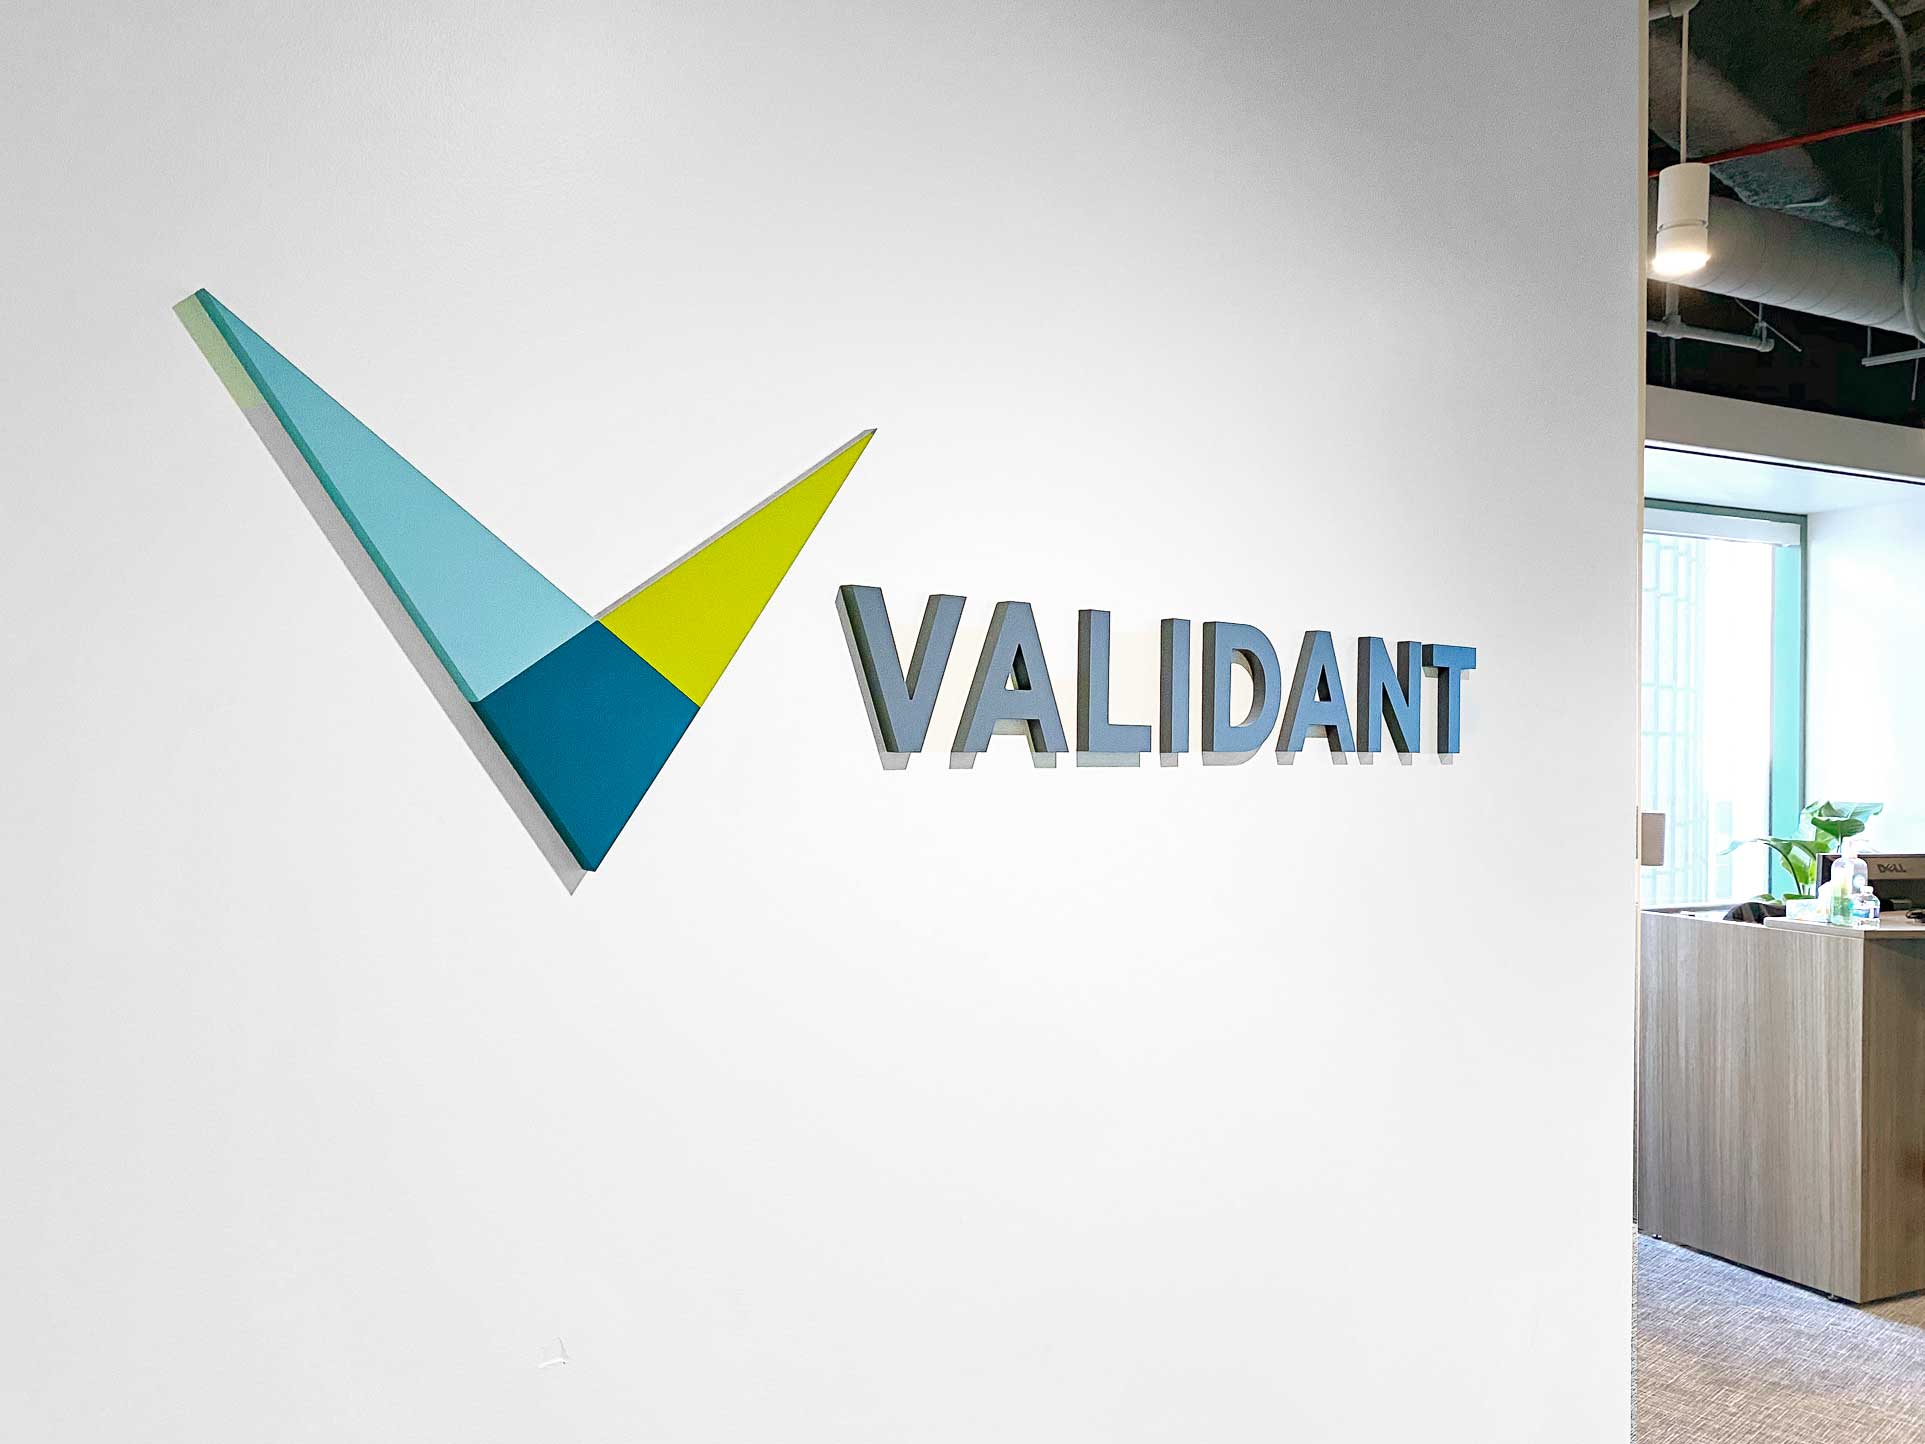 Full color dimensional logo on white wall for the lobby of Validant, a San Francisco based company that delivers end-to-end quality, compliance, and regulatory consulting service for healthcare companies around the world.